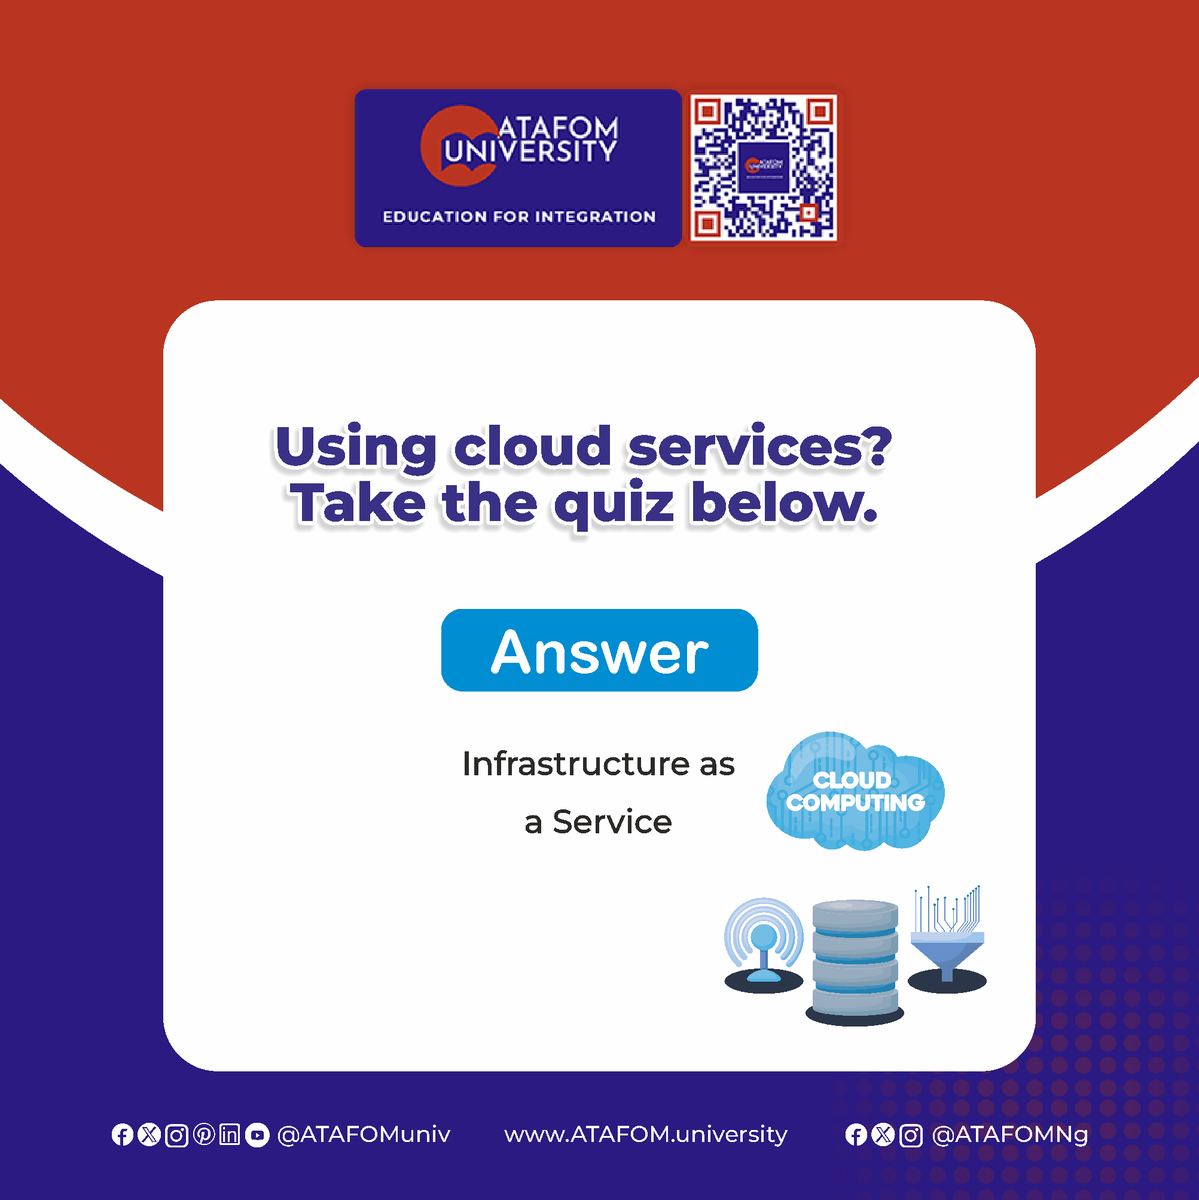 Using cloud services? Take the quiz below.🧠

Visit Our Website: ATAFOM.university

#ATAFOM
#ATAFOMuniversity
#onlineuniversity
#ATAFOMNg
#SakirYavuz
#QuizChallenge
 #PerfectTimingHolding
#EducationforIntegration #Education #ATAFOMLanguageAcademy #onlinecourses